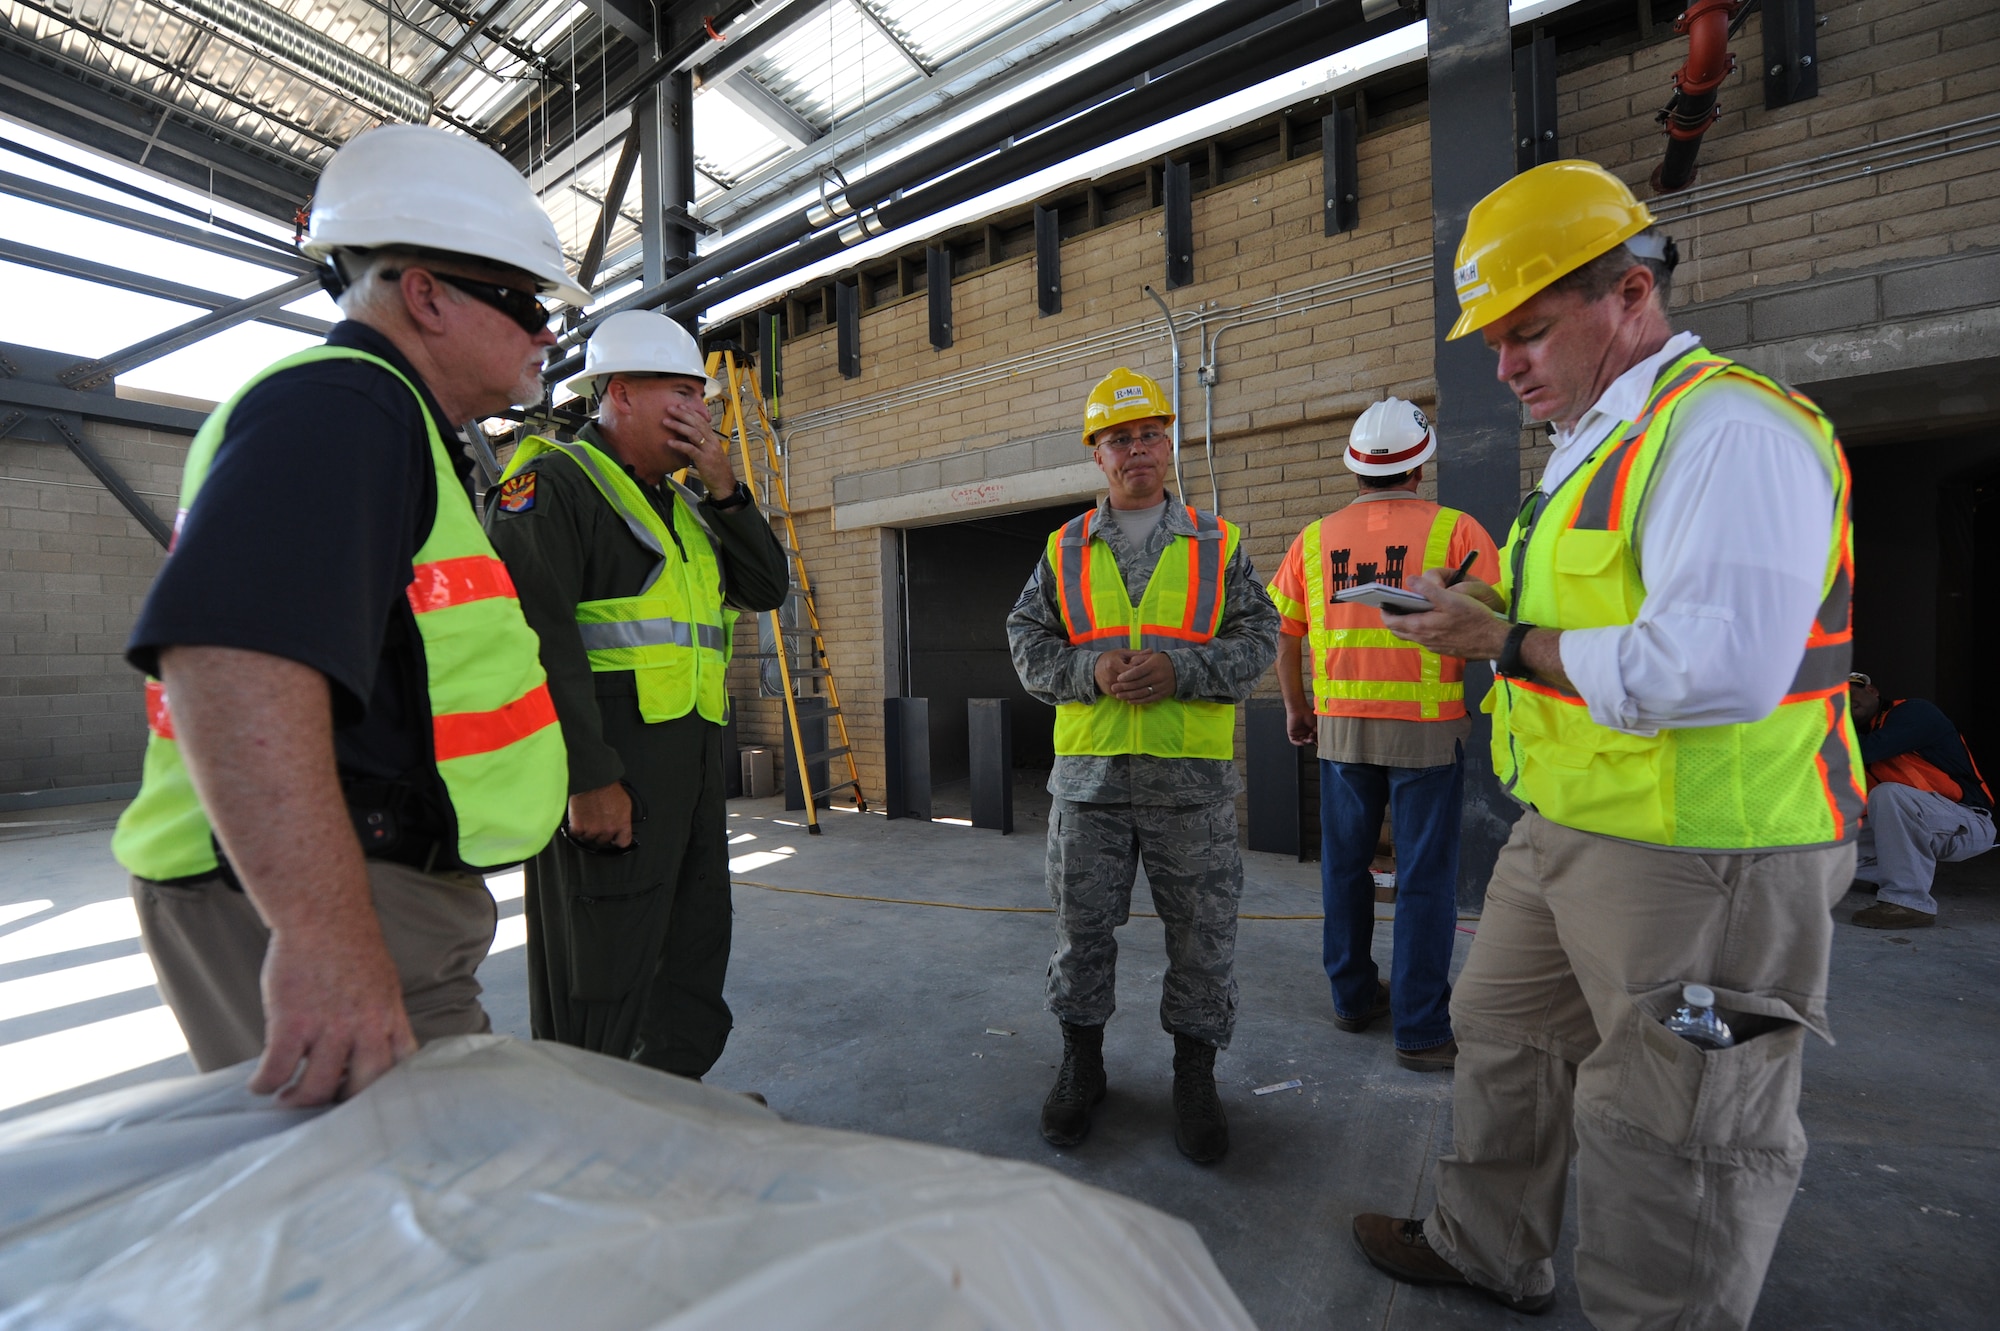 An Arizona Republic reporter takes notes as members of the F-35 construction team show him projects underway on base. (U.S. Air Force photo/Airman 1st Class Devante Williams)